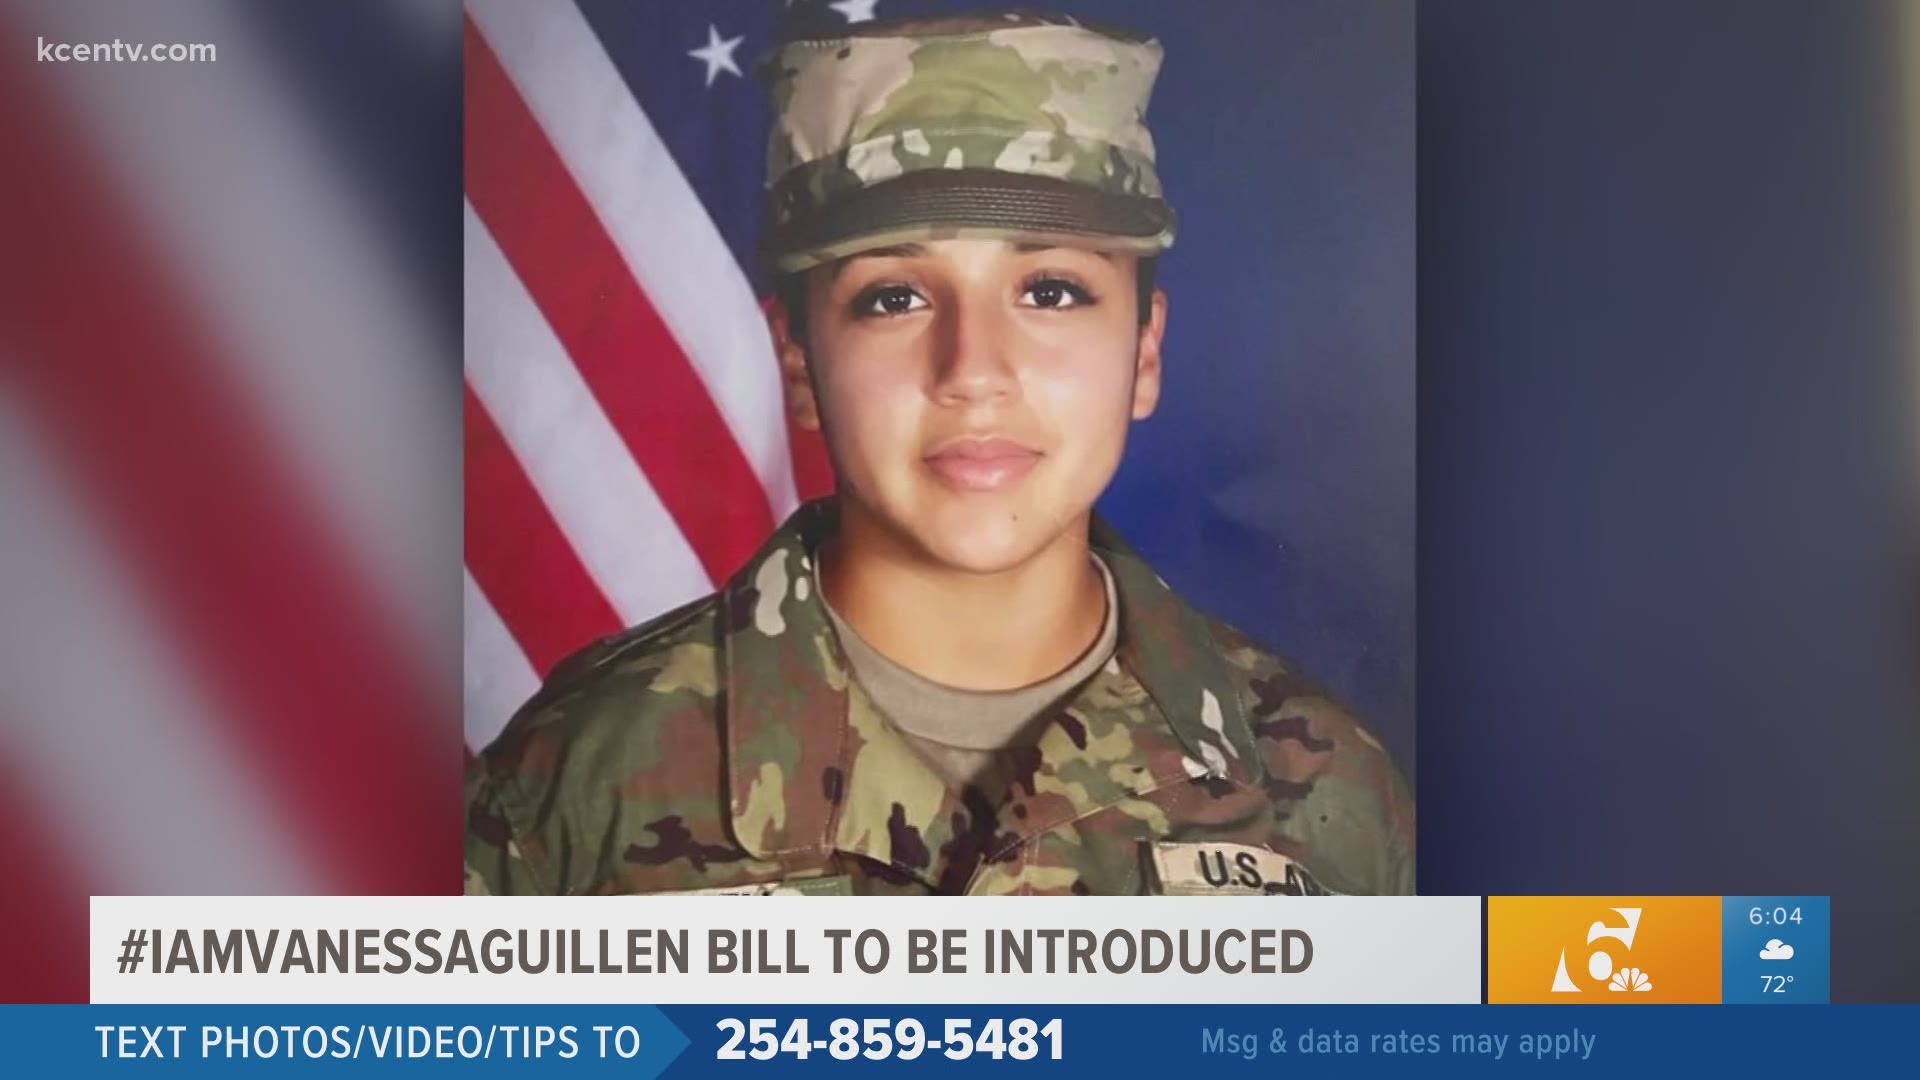 The #IAmVanessaGuillen bill will be introduced to Congress today. Texas Today's Maria Aguilera explains how this case sparked a national movement.